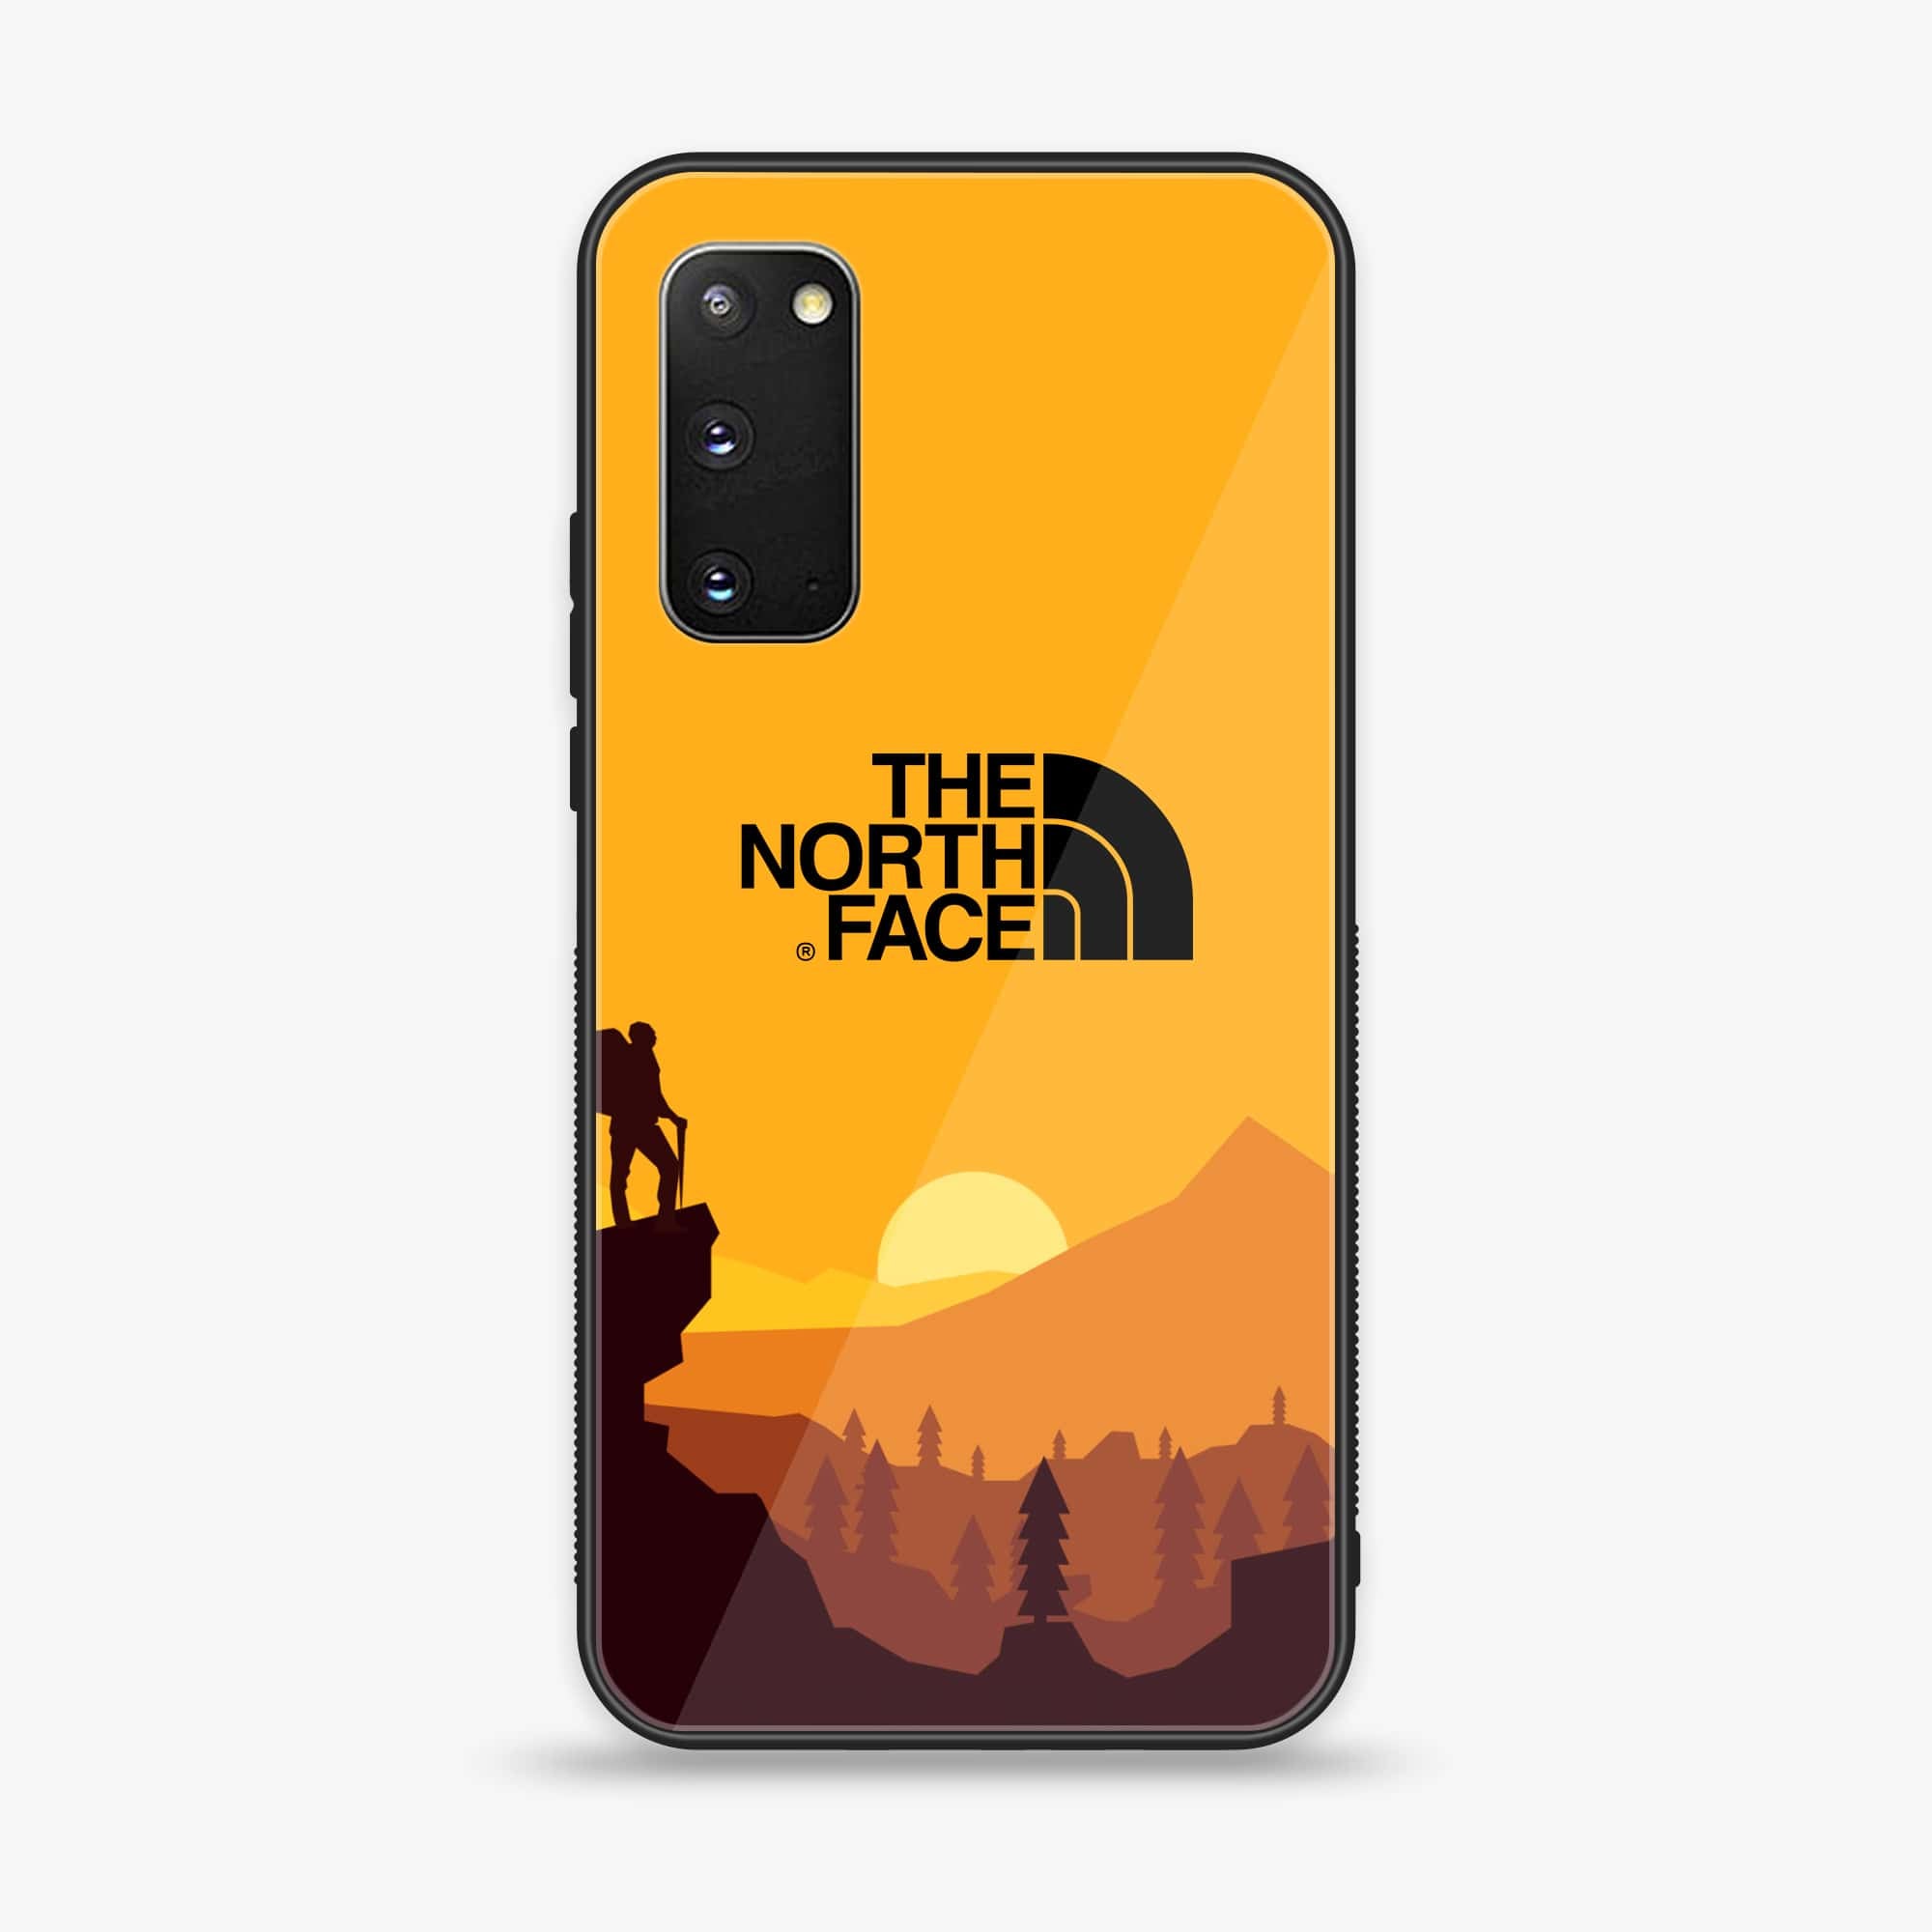 Samsung Galaxy S20 - The North Face Series - Premium Printed Glass soft Bumper shock Proof Case